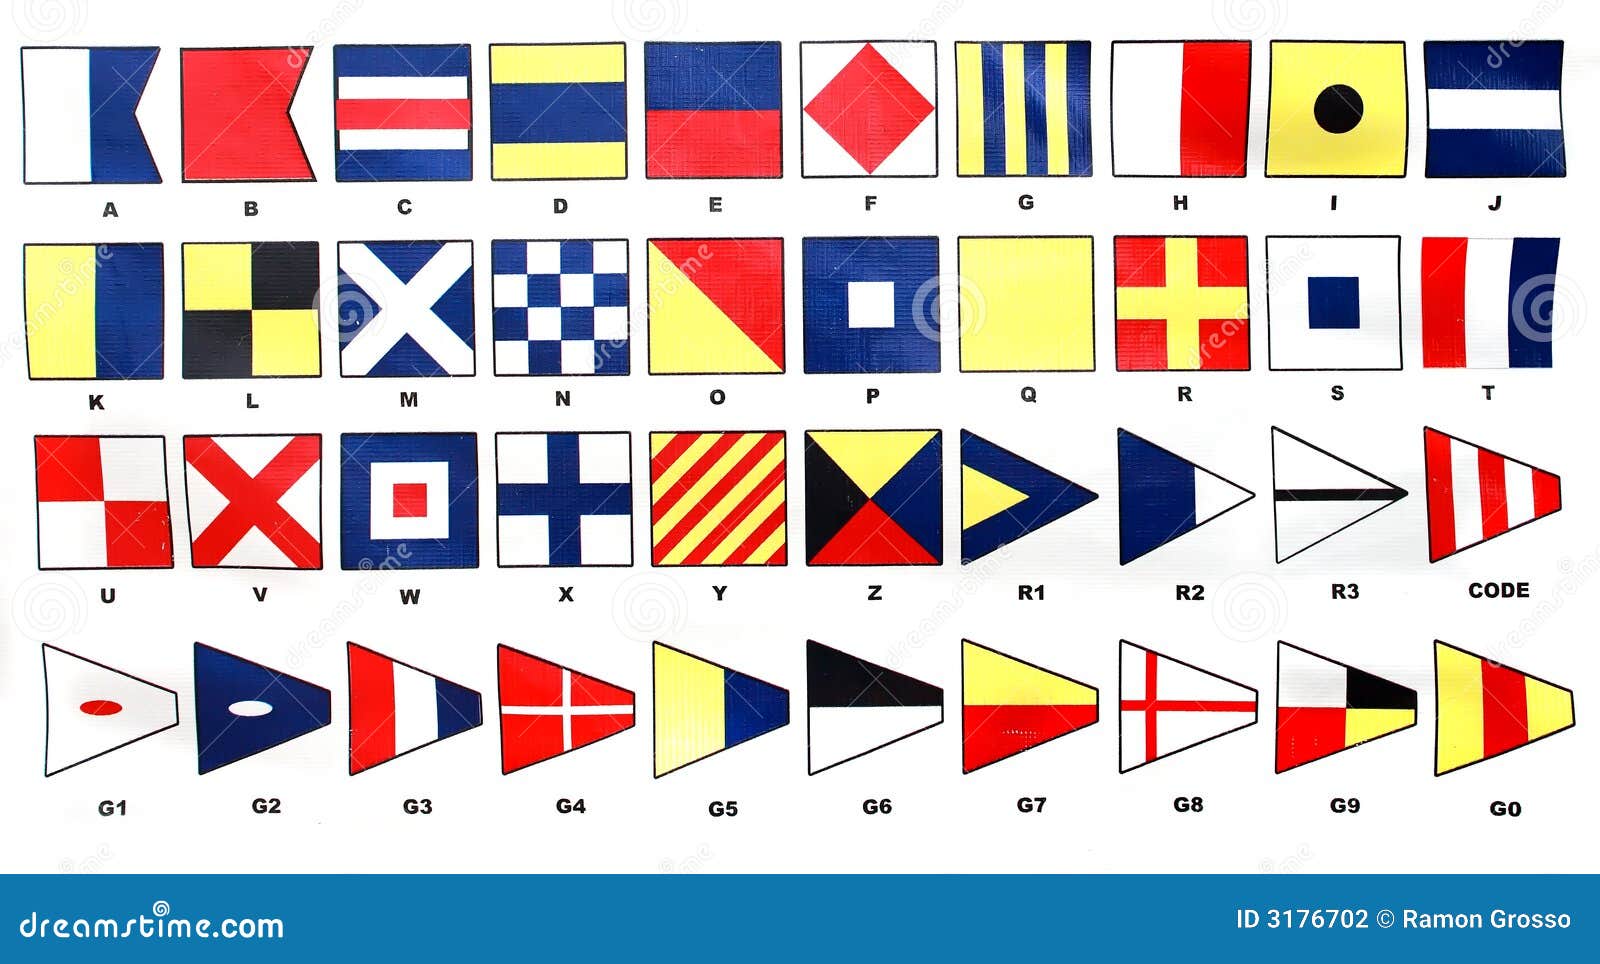 International signal code with flags on ships for announcements.